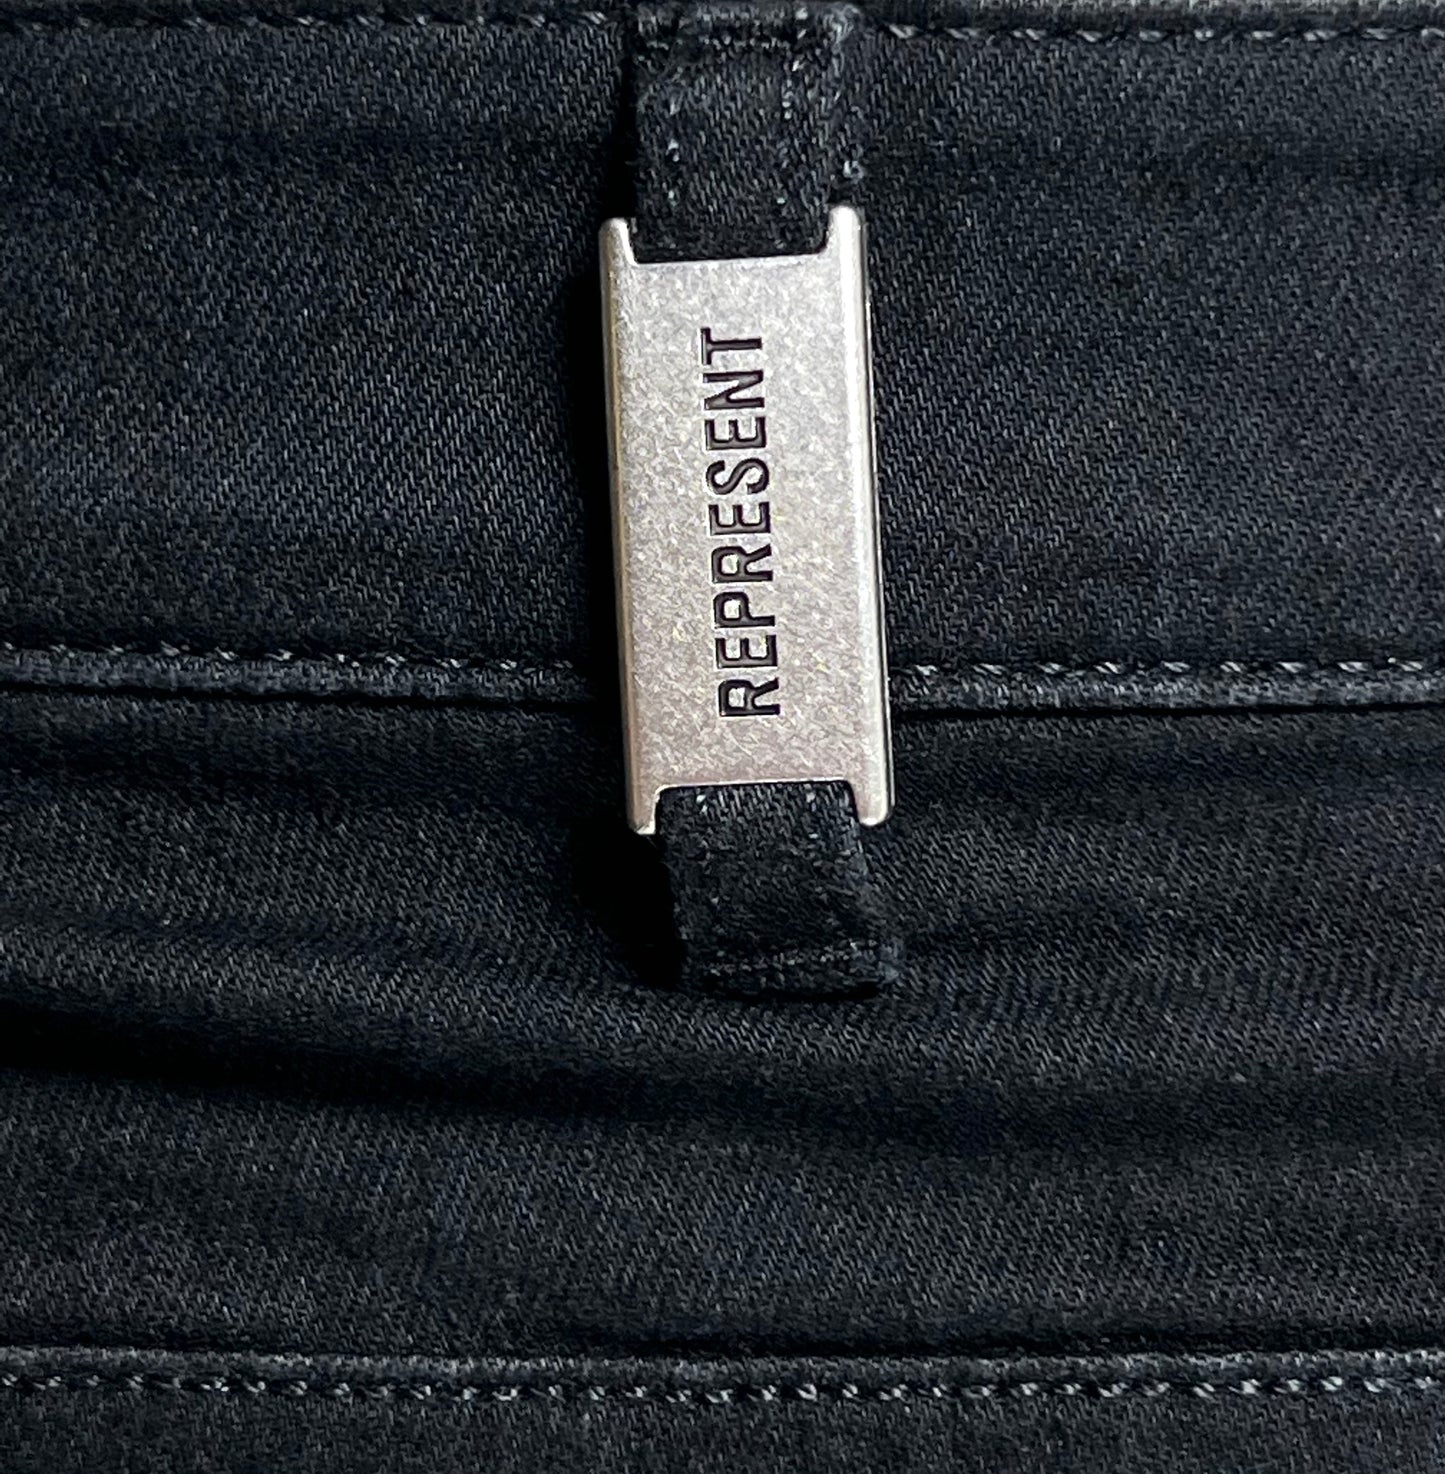 A close up of a pocket with a distressed-style label from streetwear brand REPRESENT M07044 DESTROYER DENIM BLACK on it.